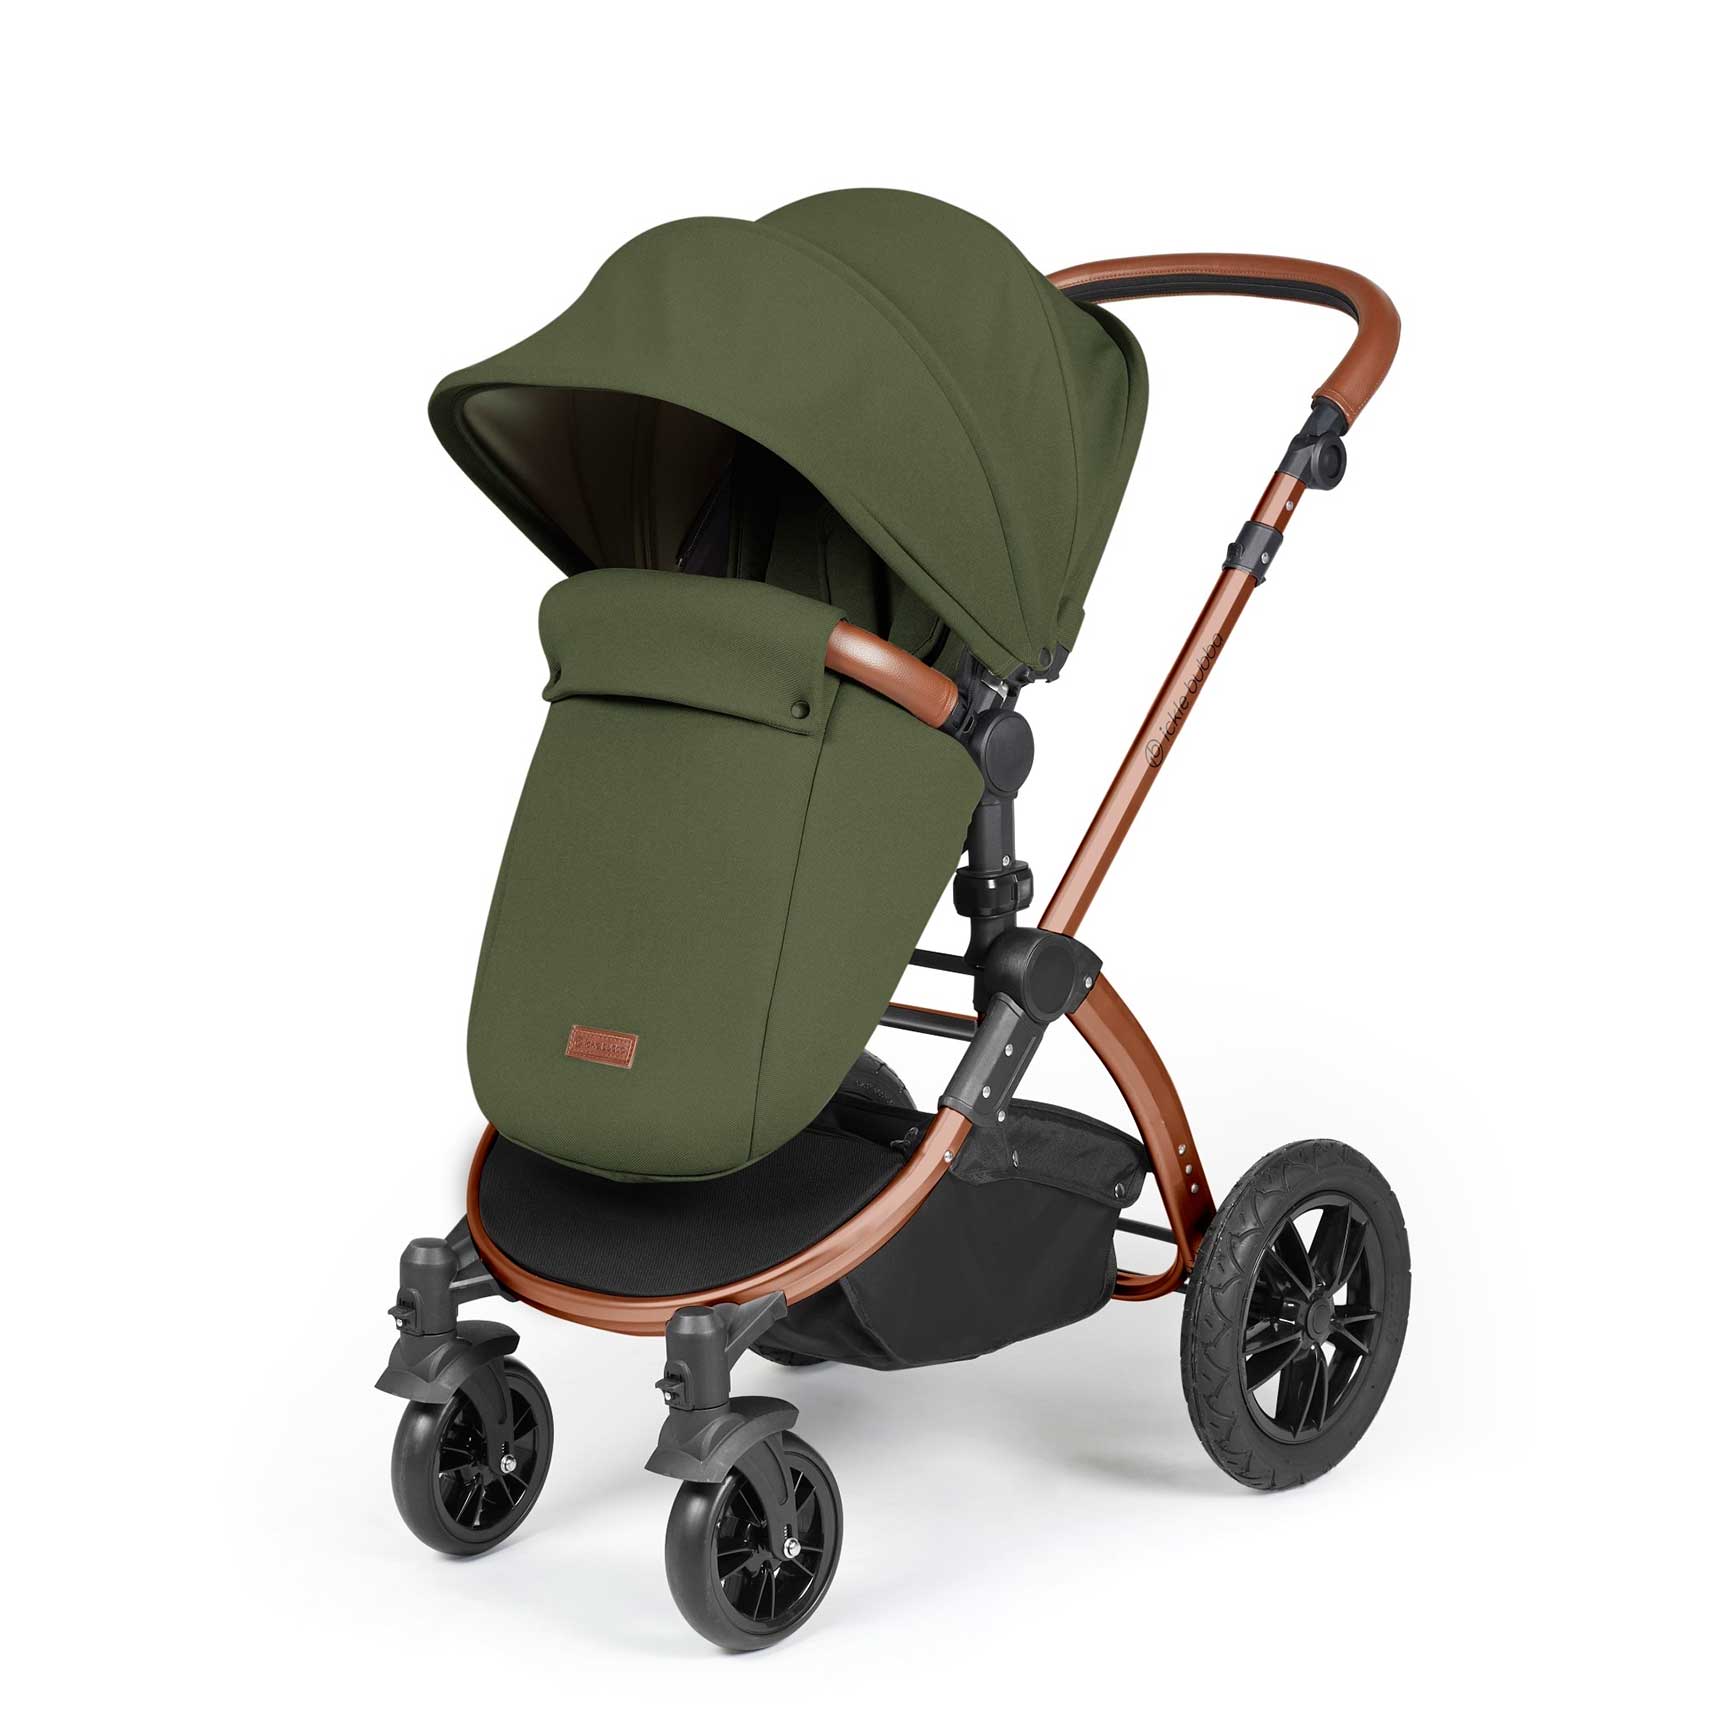 Ickle Bubba Stomp Luxe All-in-One Travel System with Isofix Base in Bronze/Woodland/Tan Travel Systems 10-011-300-022 5056515026627